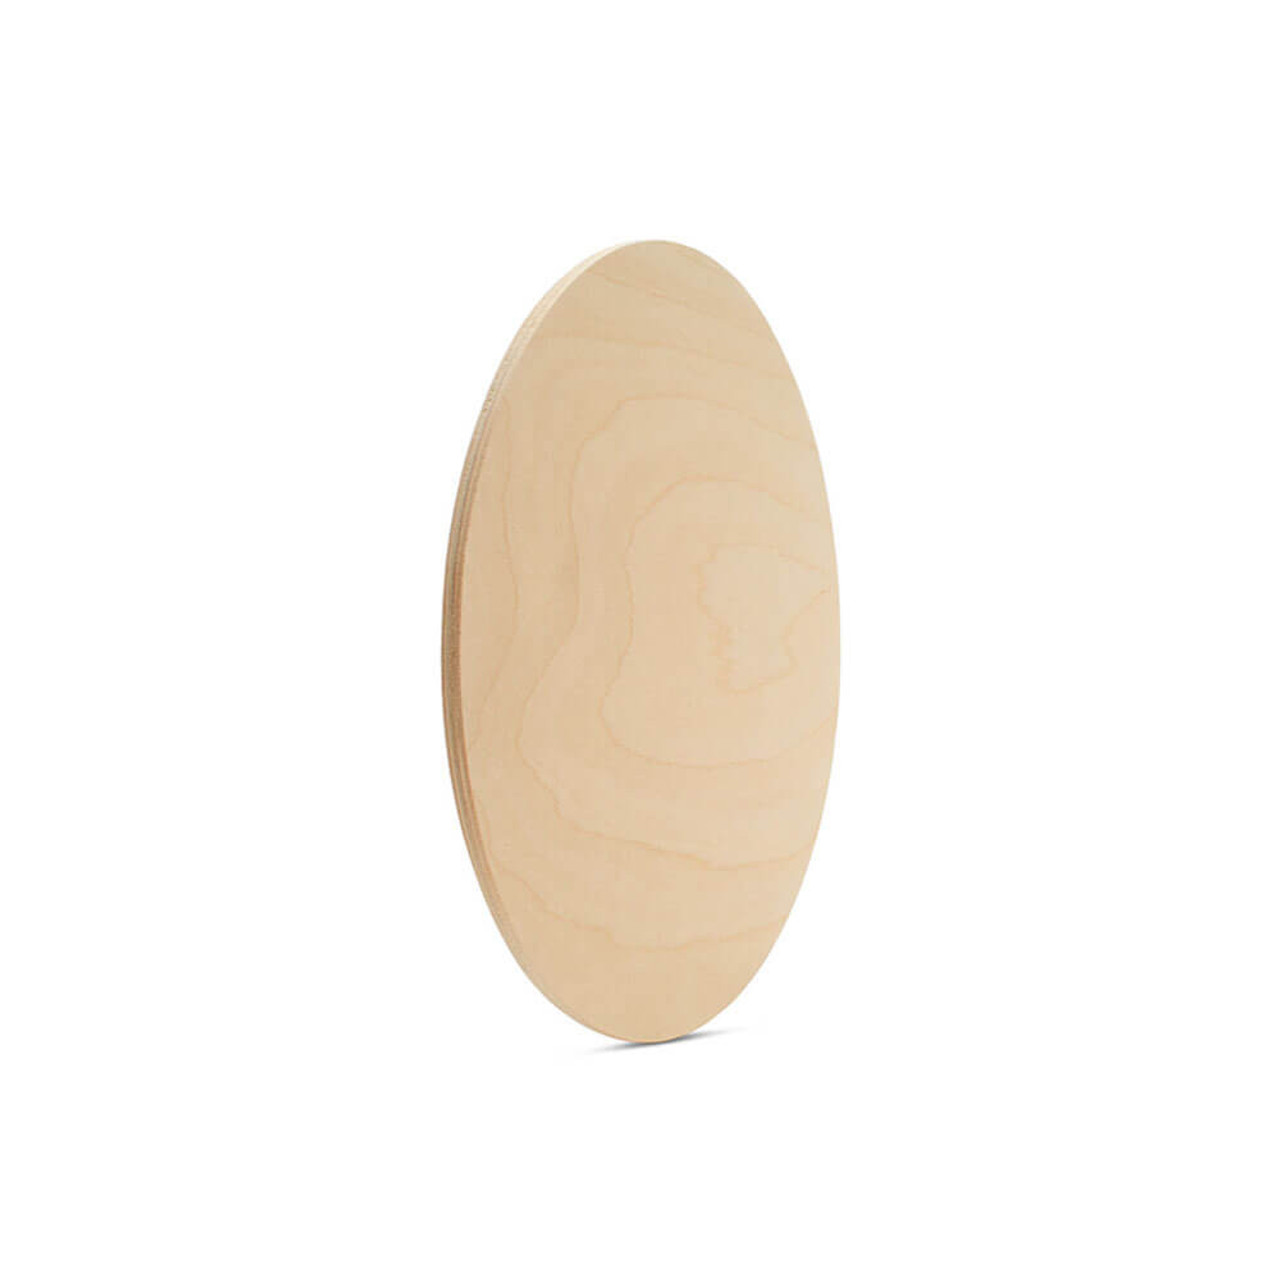 Unfinished Wood Round Circle Cutouts, 12 Inch Wooden Discs For